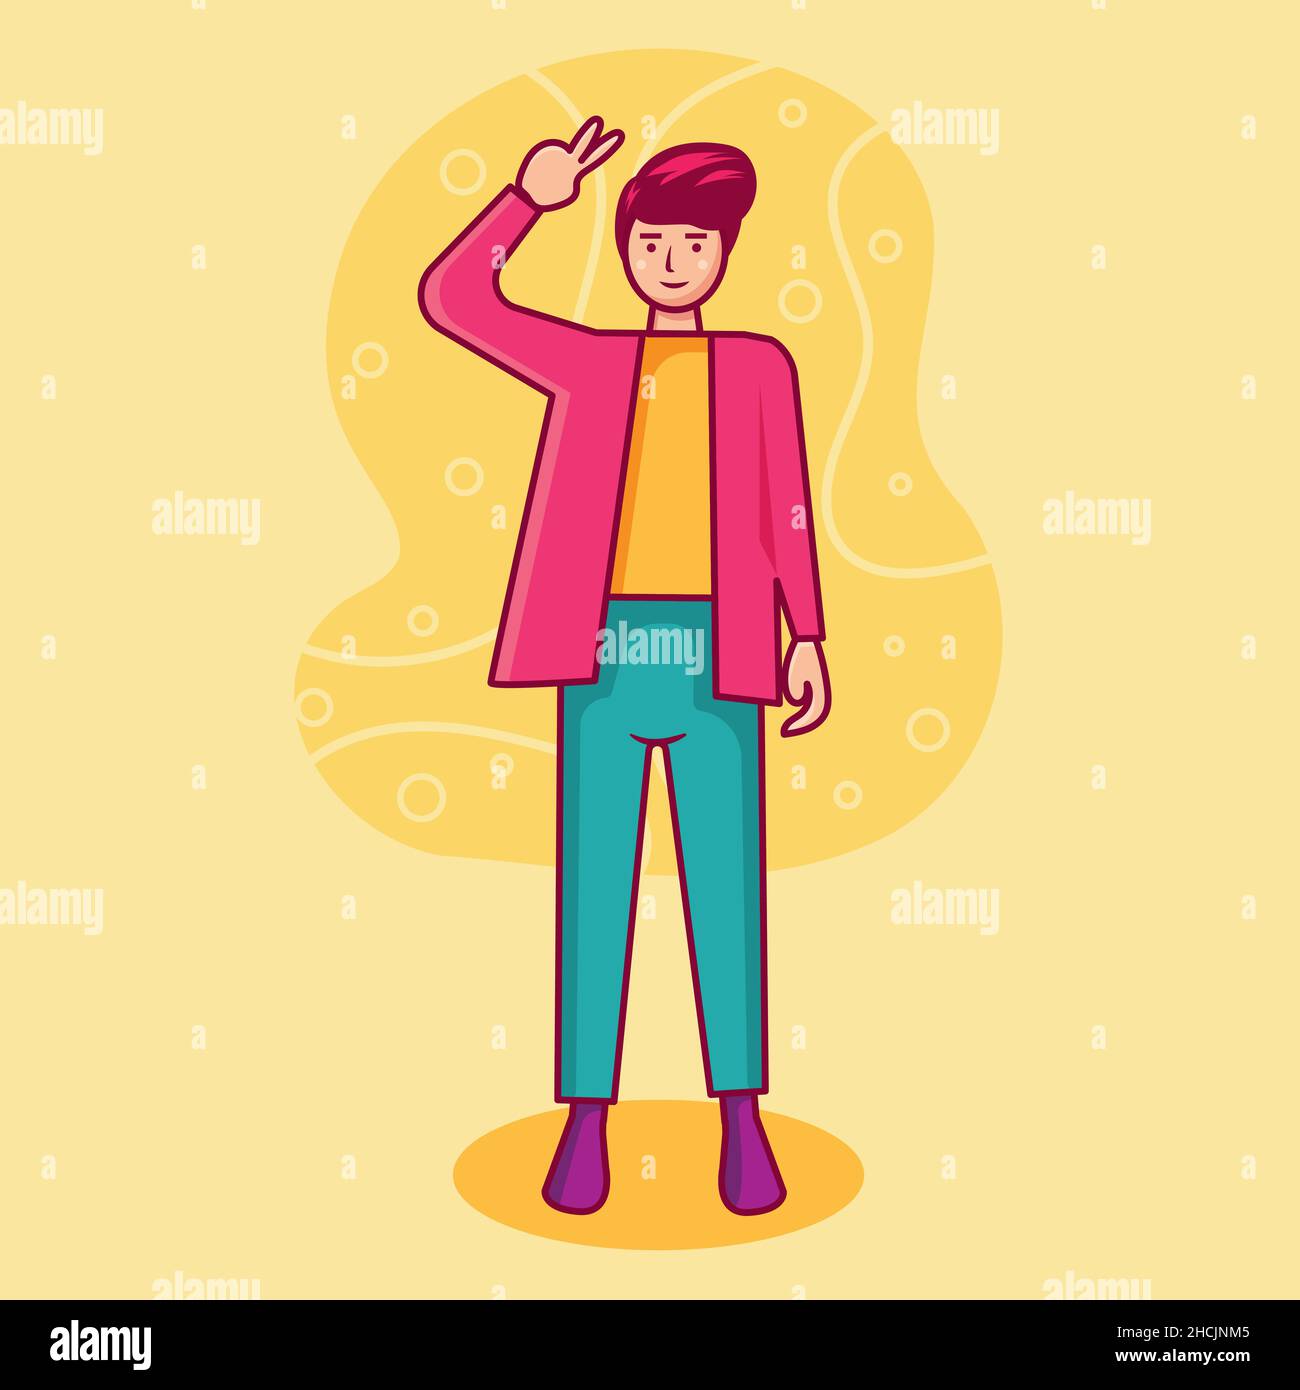 cute cartoon young guy with peace sign hand gesture vector illustration Stock Vector